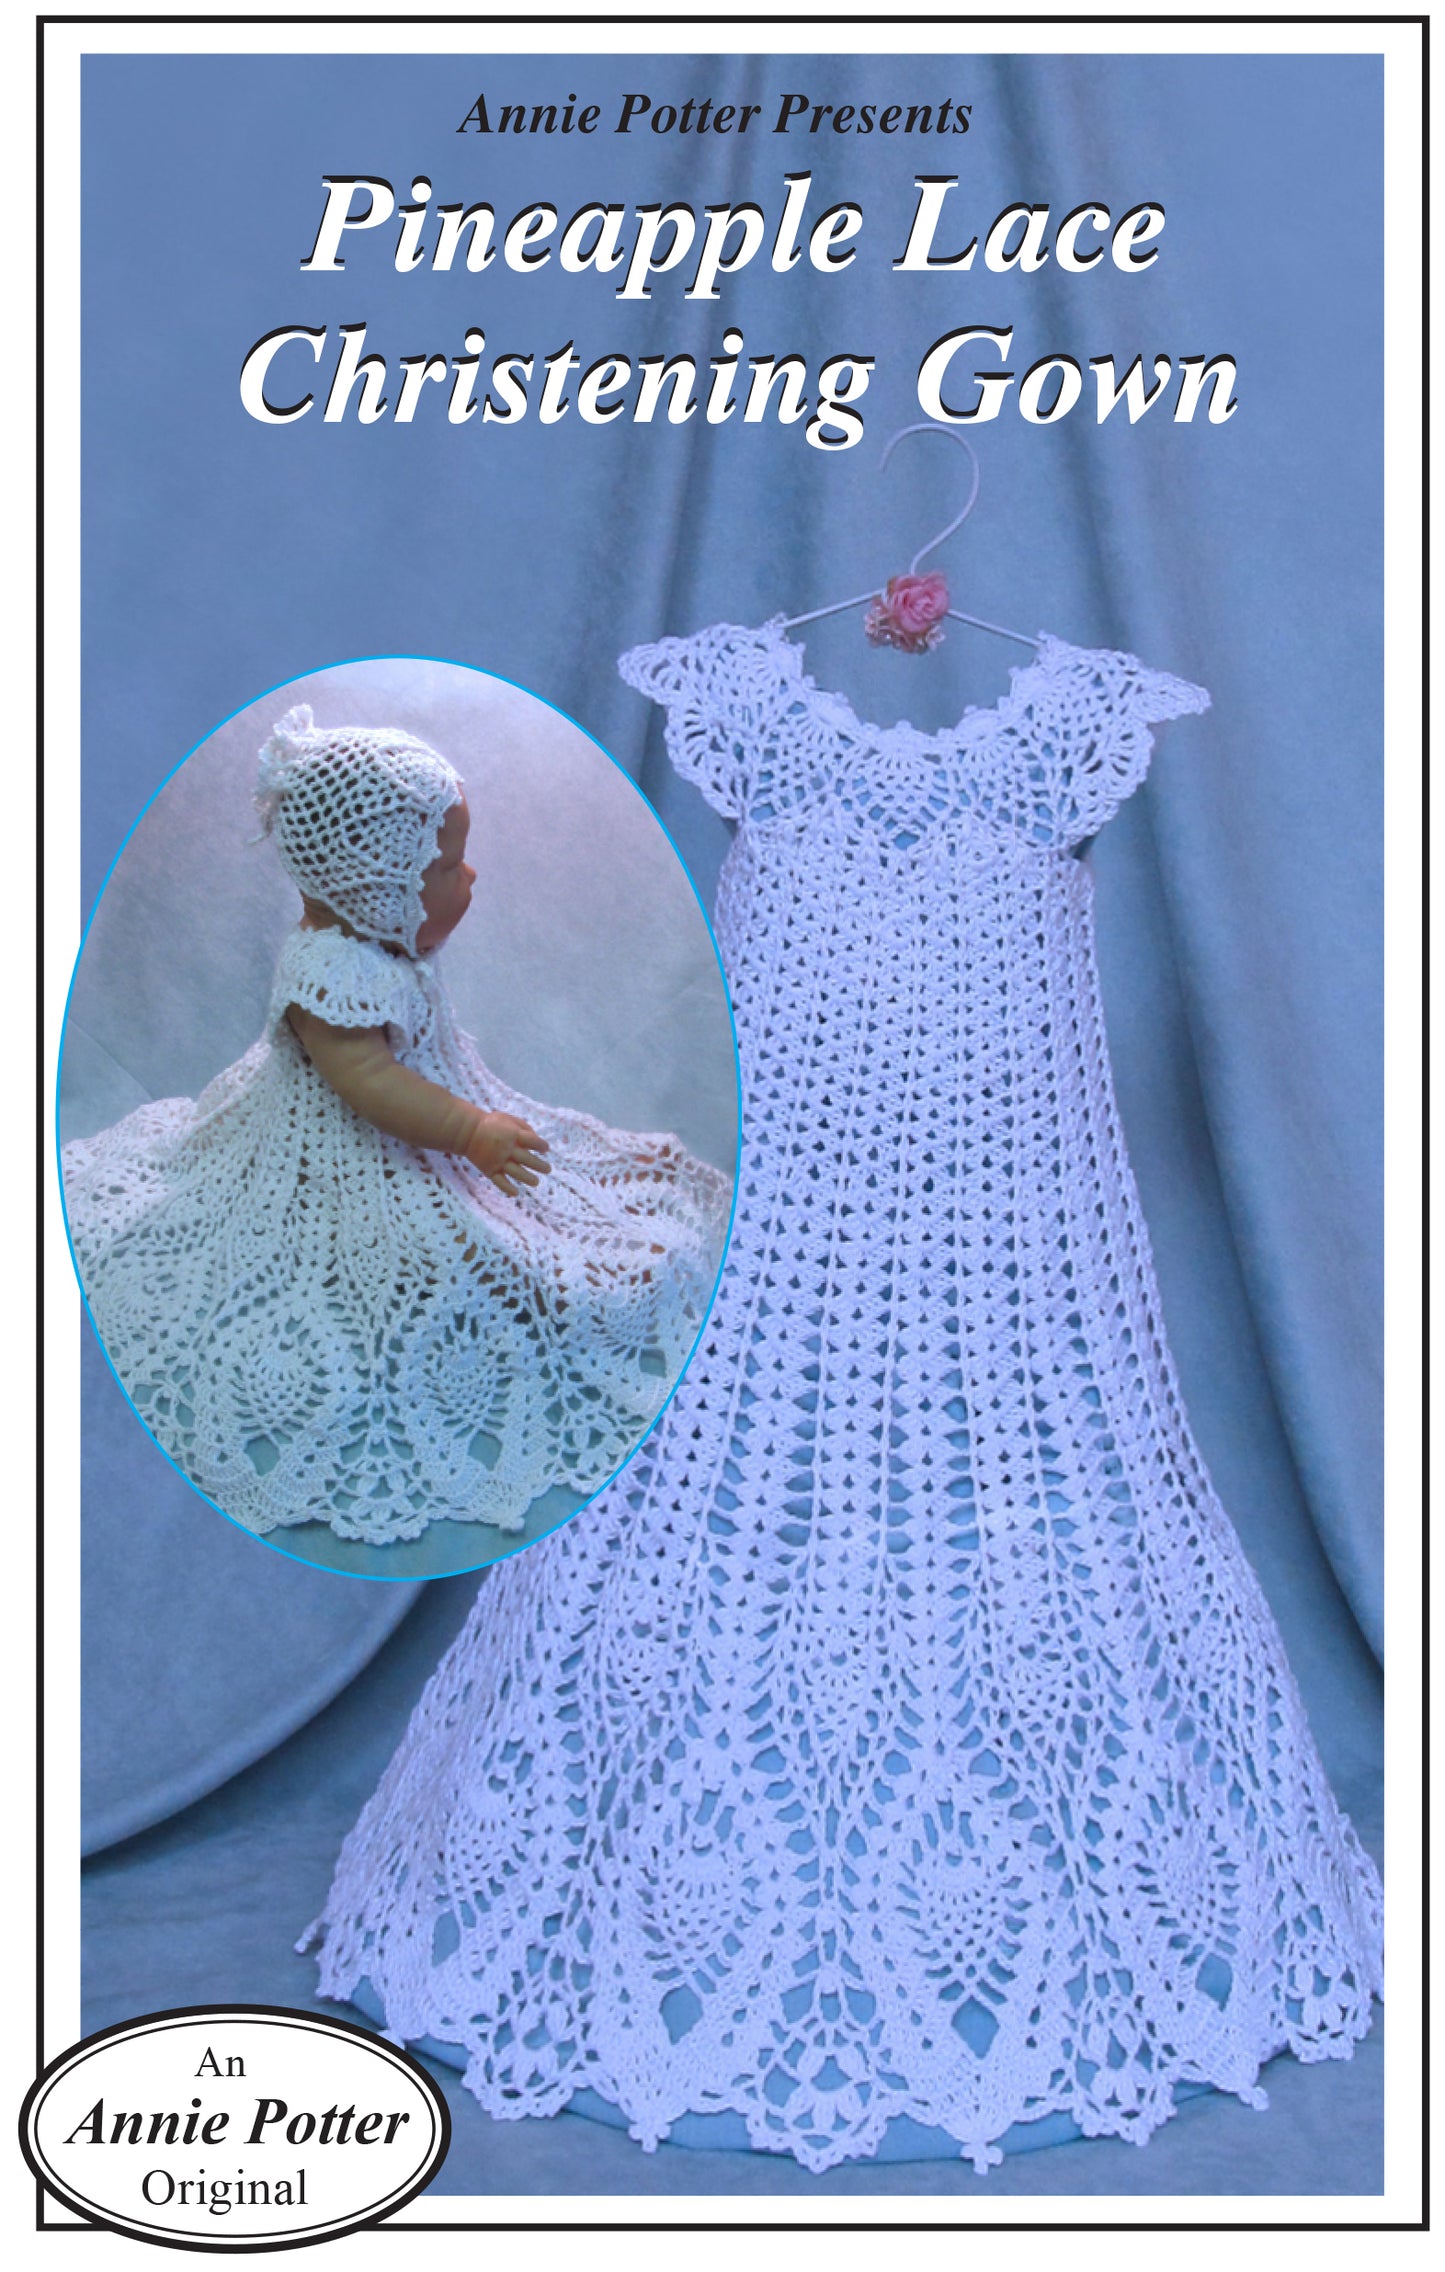 Lace Christening Gown Pattern, Pineapple Lace Christening Gown, Pineapple Crochet, PDF - Annie Potter's Yarn Basket